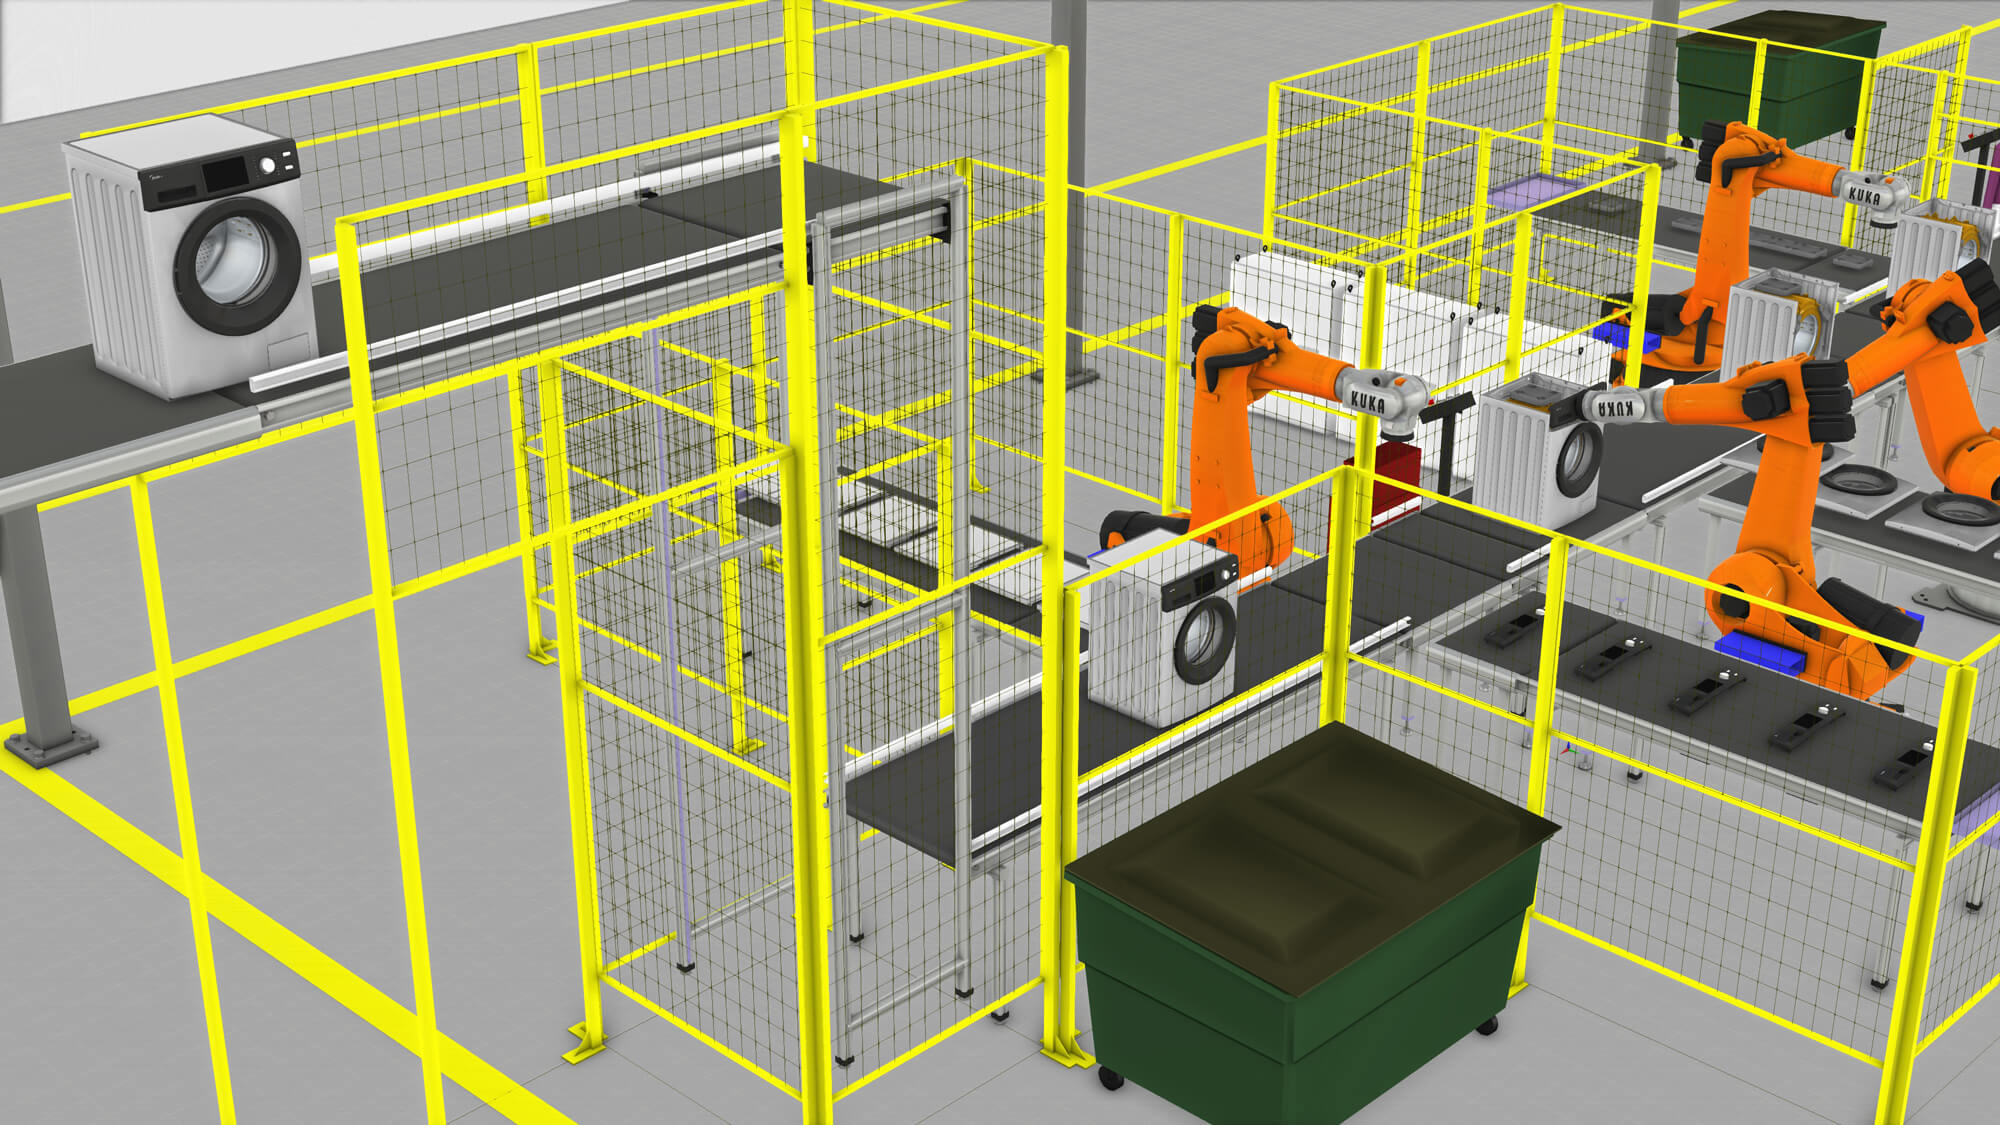 Simulation of a Midea washing machine assembly line